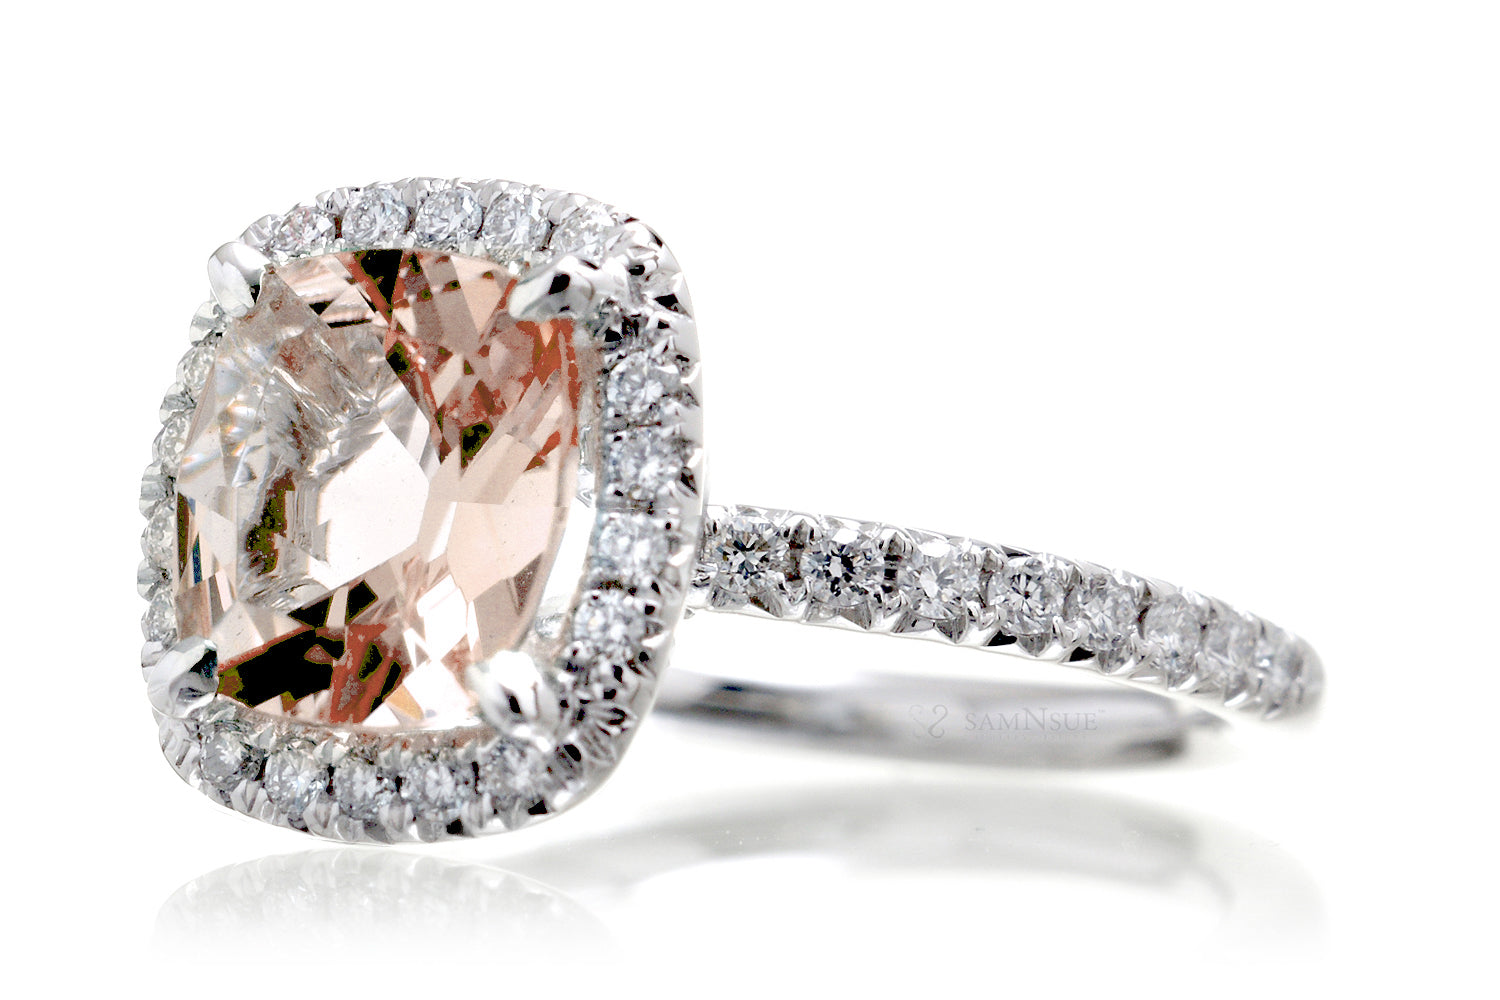 The Drenched Square Cushion Morganite